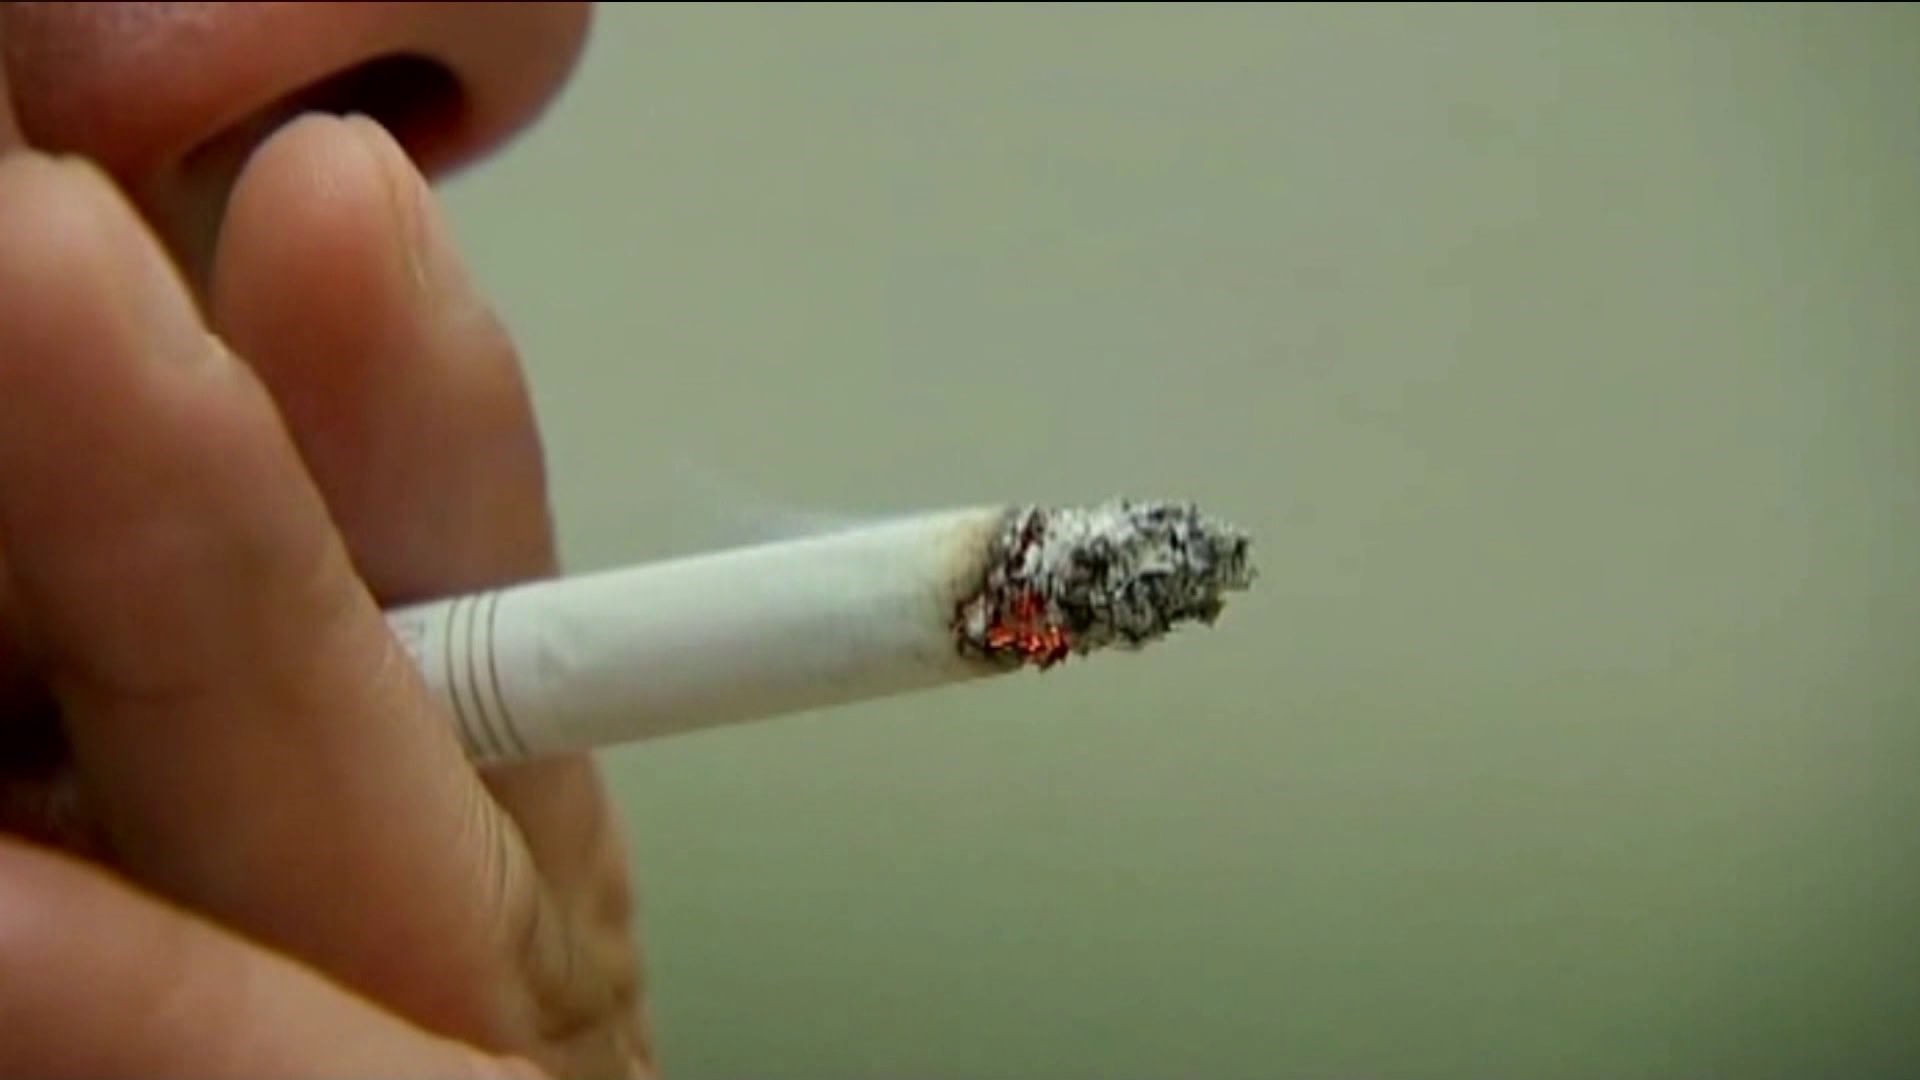 Proposed legislation gains momentum, would raise legal age to buy tobacco in CT